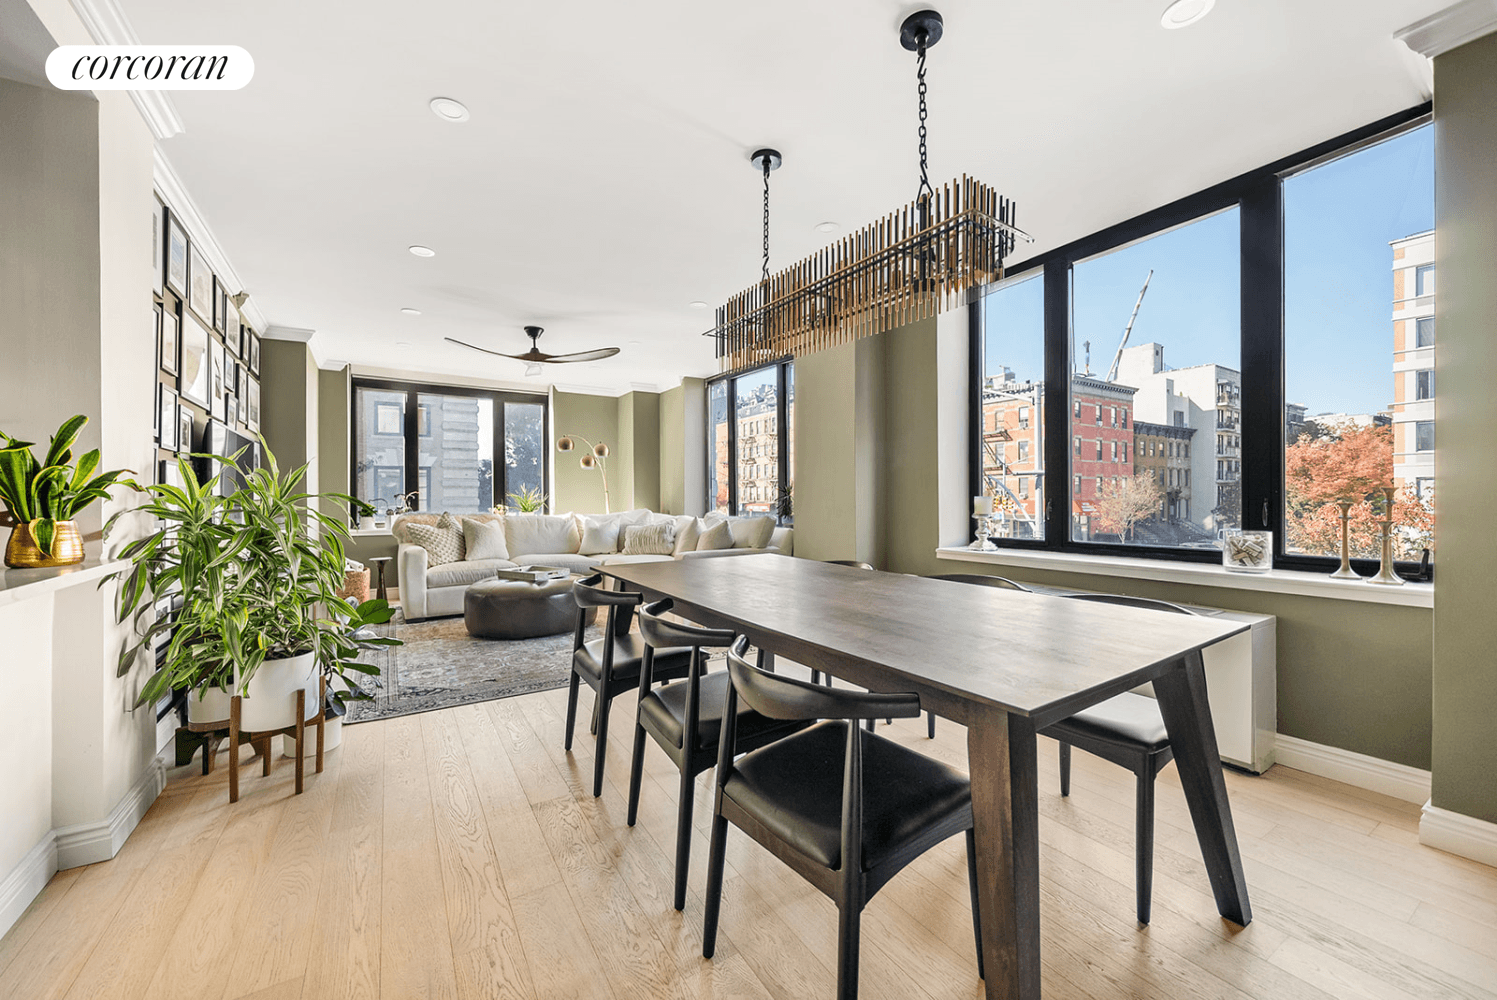 Welcome to your new home in the heart of the vibrant and culturally rich Central Harlem.